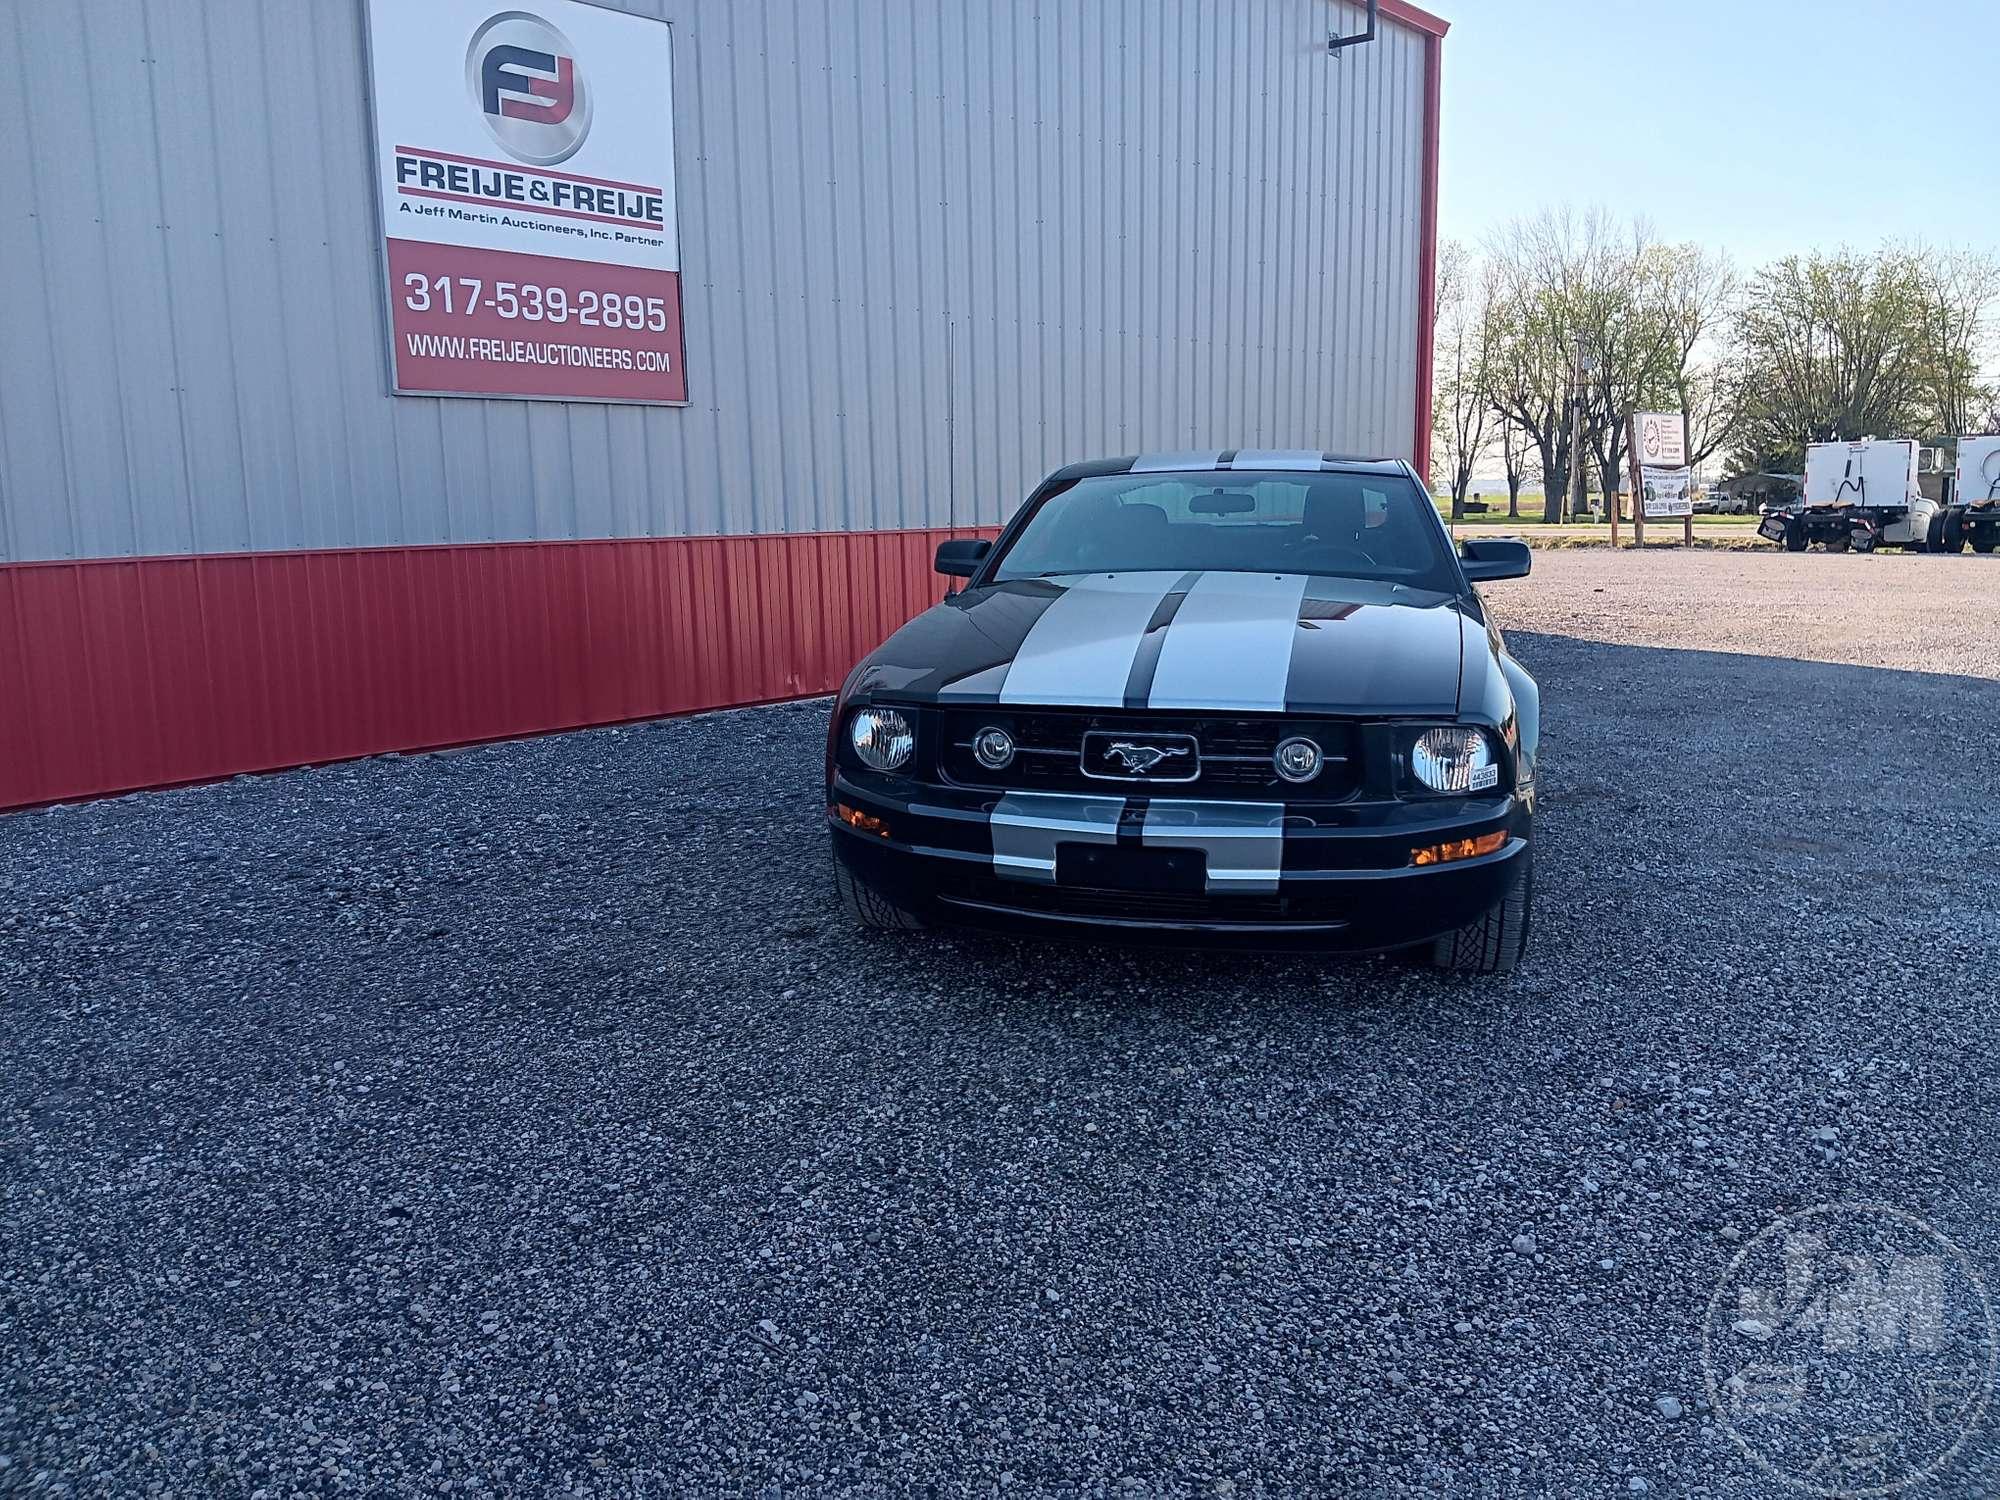 2007 FORD MUSTANG VIN: 1ZVFT80N575325300 COUPE